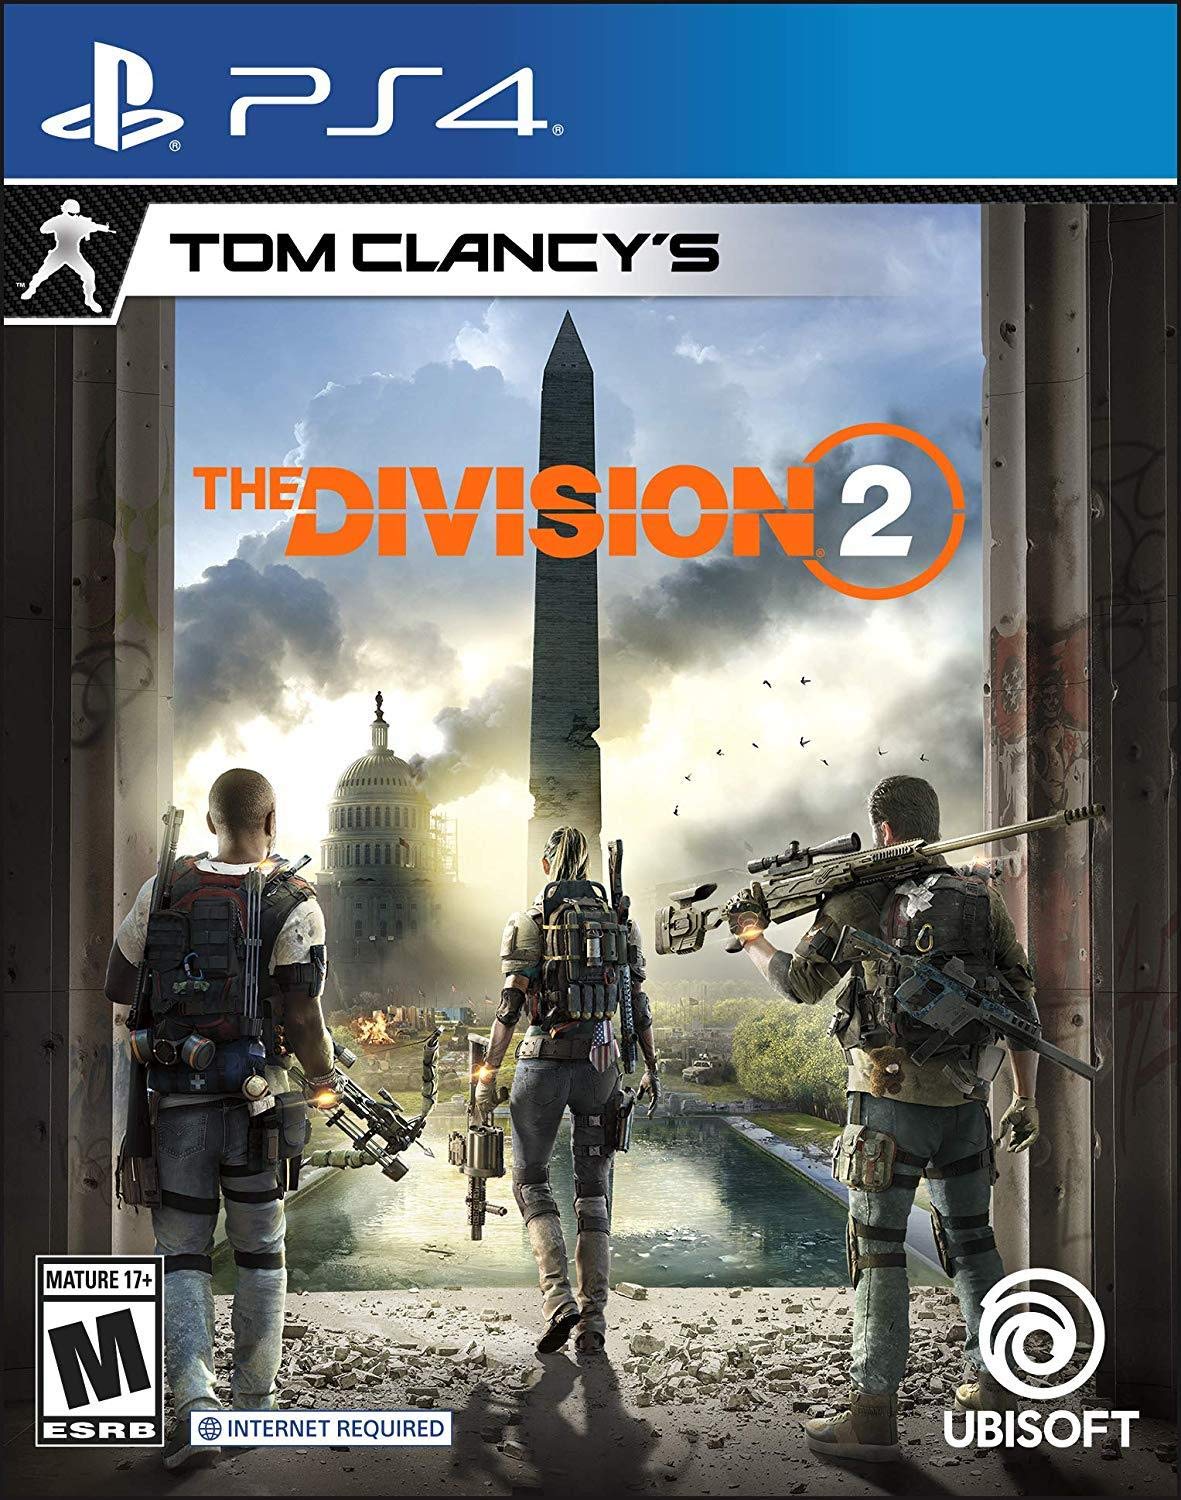 Tom Clancy's The Division 2 - Darkside Records